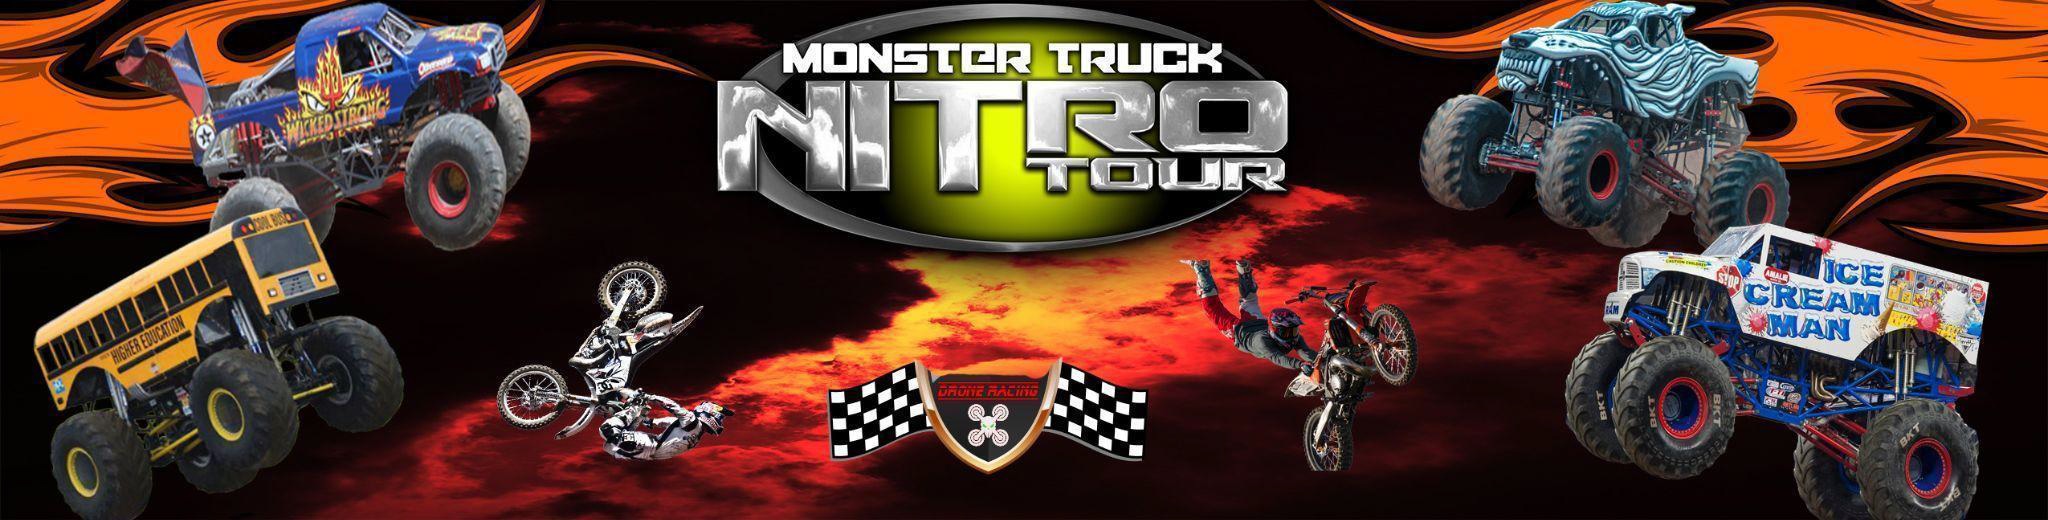 Monster Truck Nitro Tour Invades the First National Bank Arena